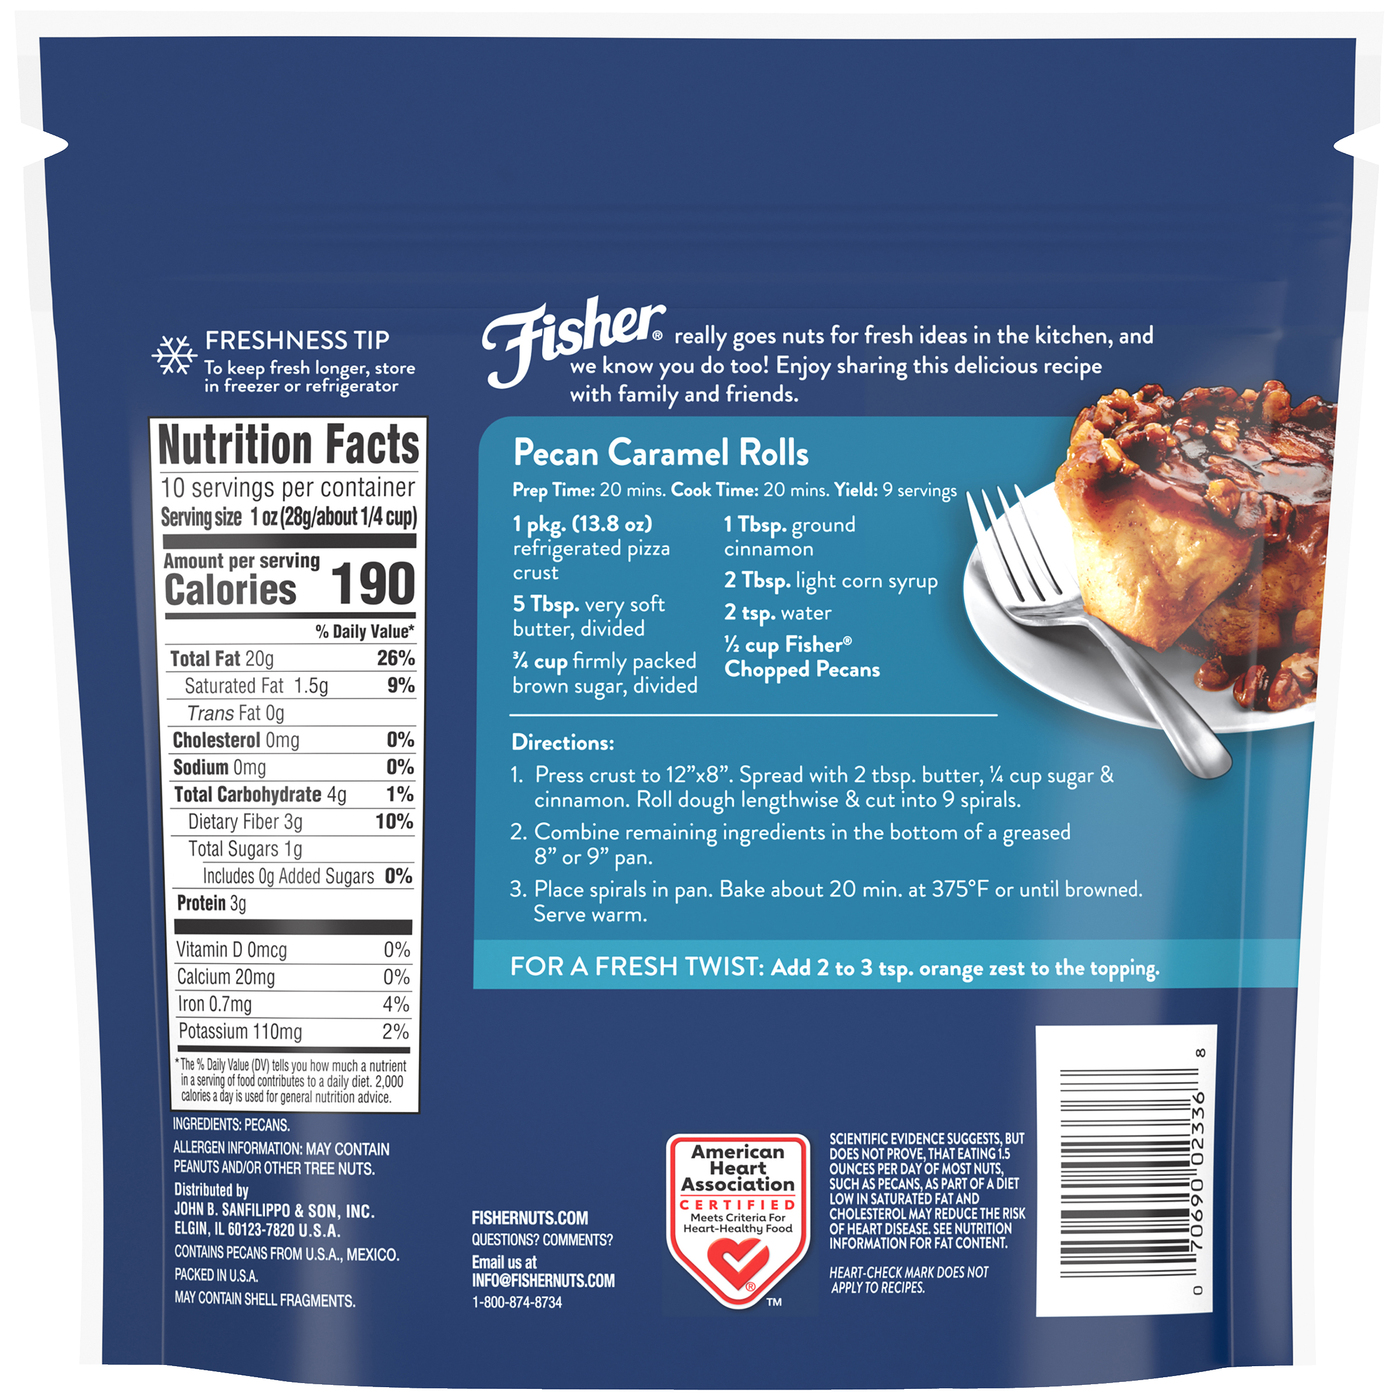 Fisher Chef's Naturals Gluten Free, No Preservatives, Non-GMO Chopped Pecans, 10 oz Bag - image 3 of 10